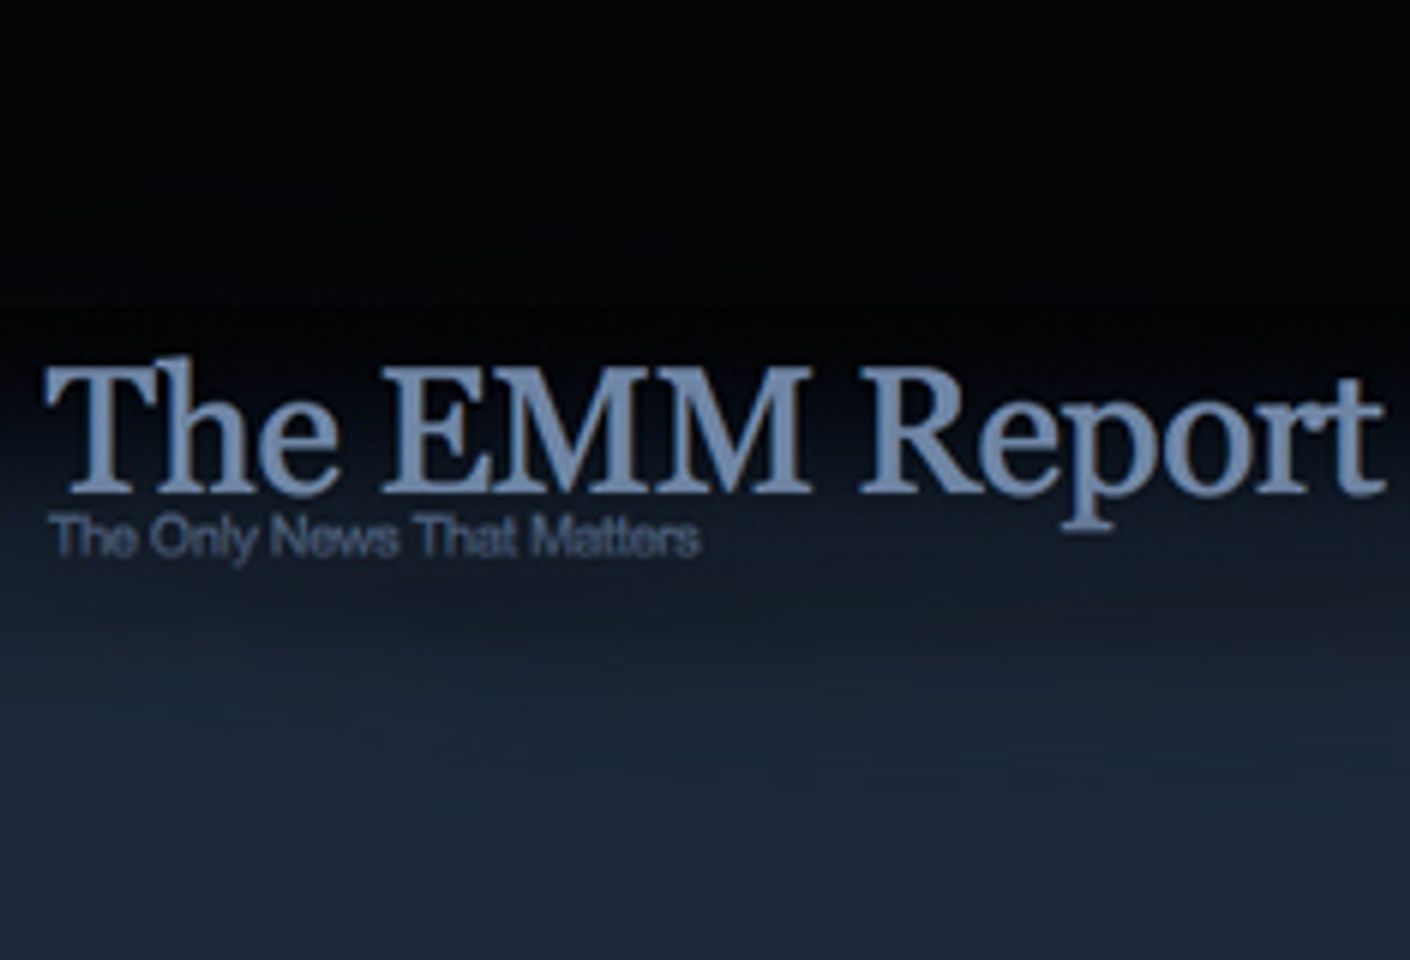 EMM Report Launches Interactive Blog